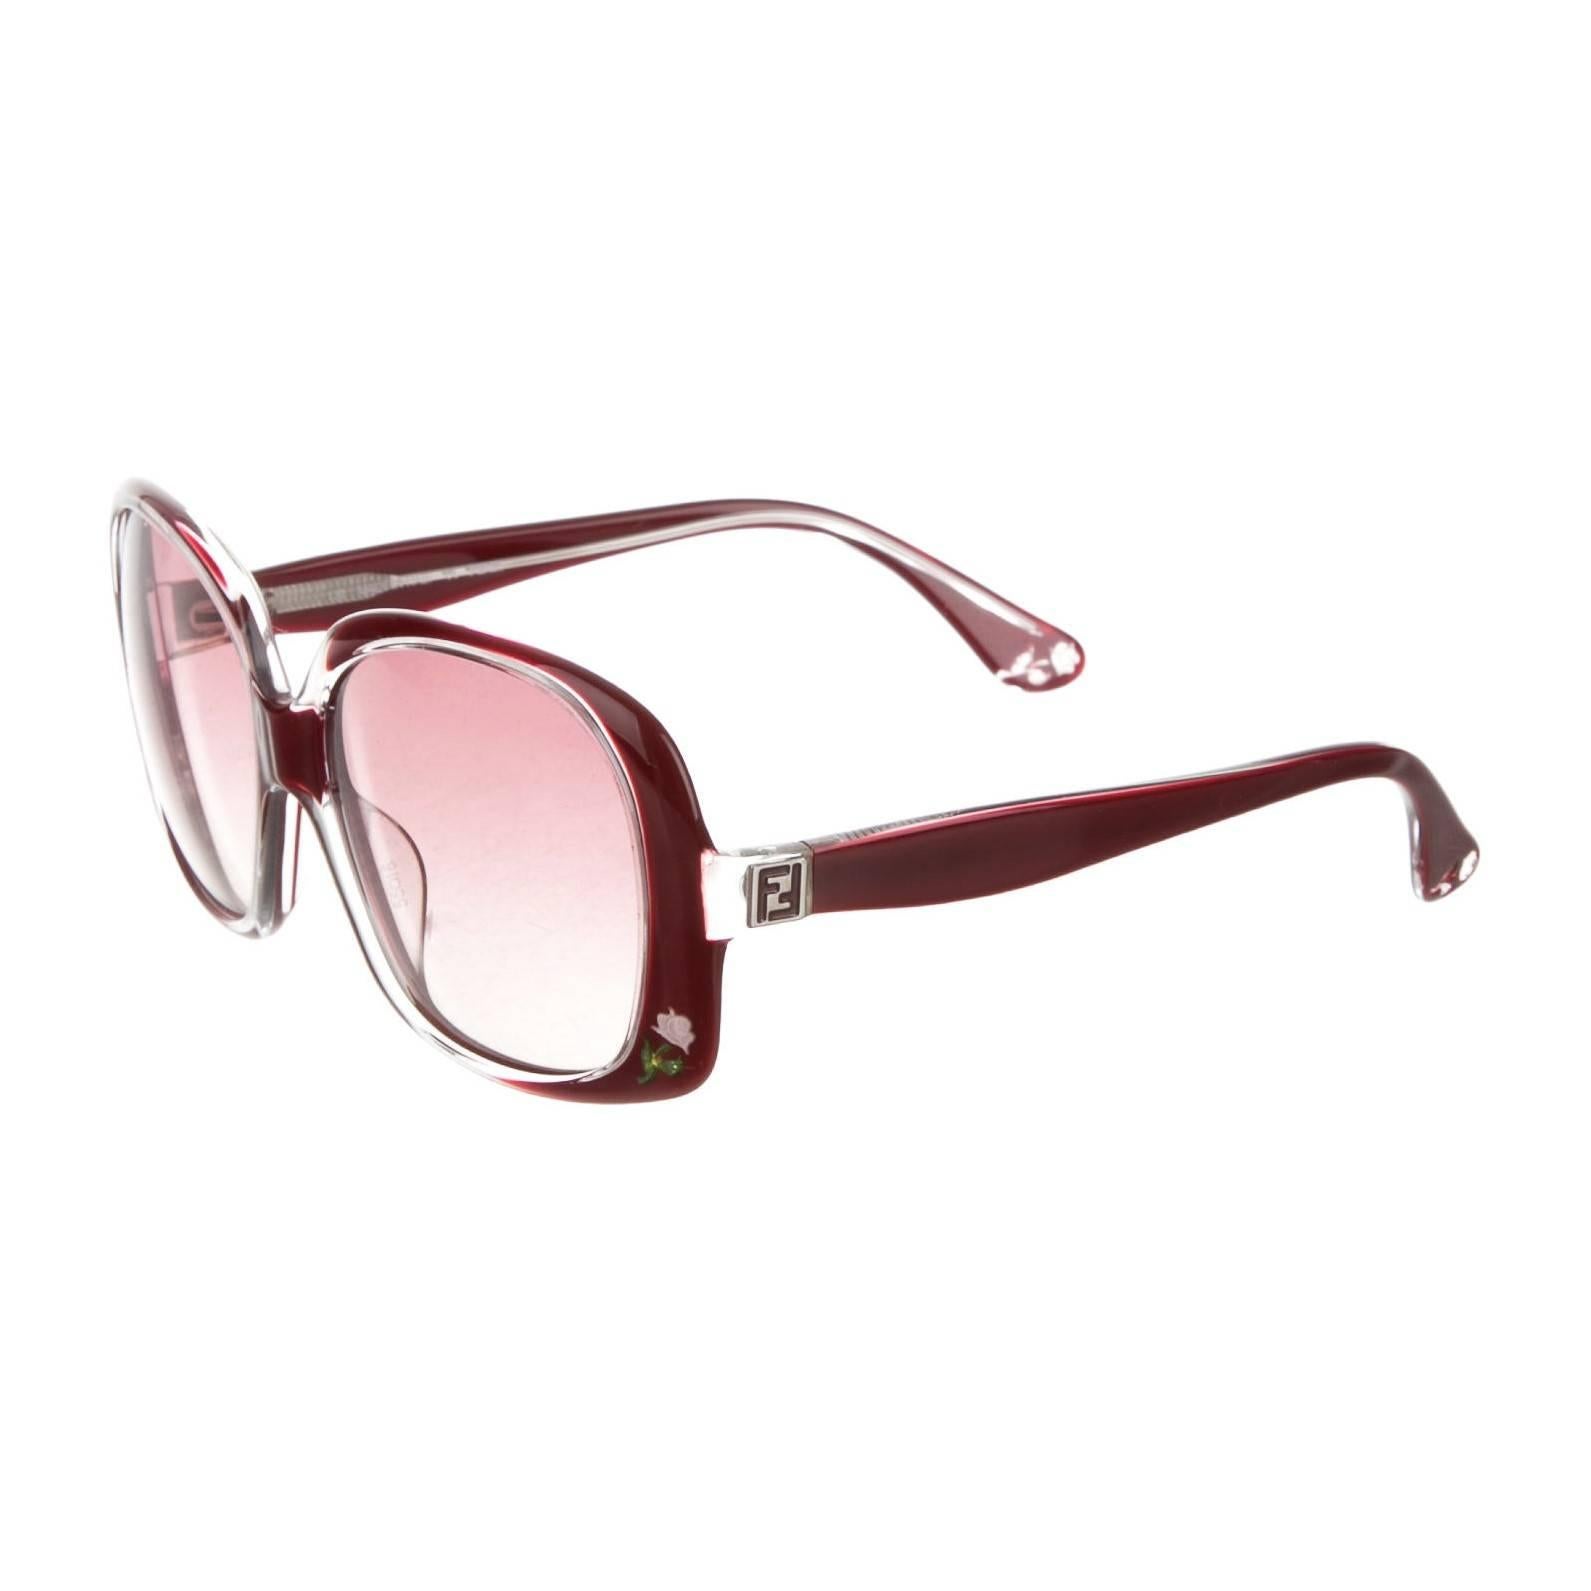 New Fendi Deep Red Rose Inlaid Sunglasses With Case 8